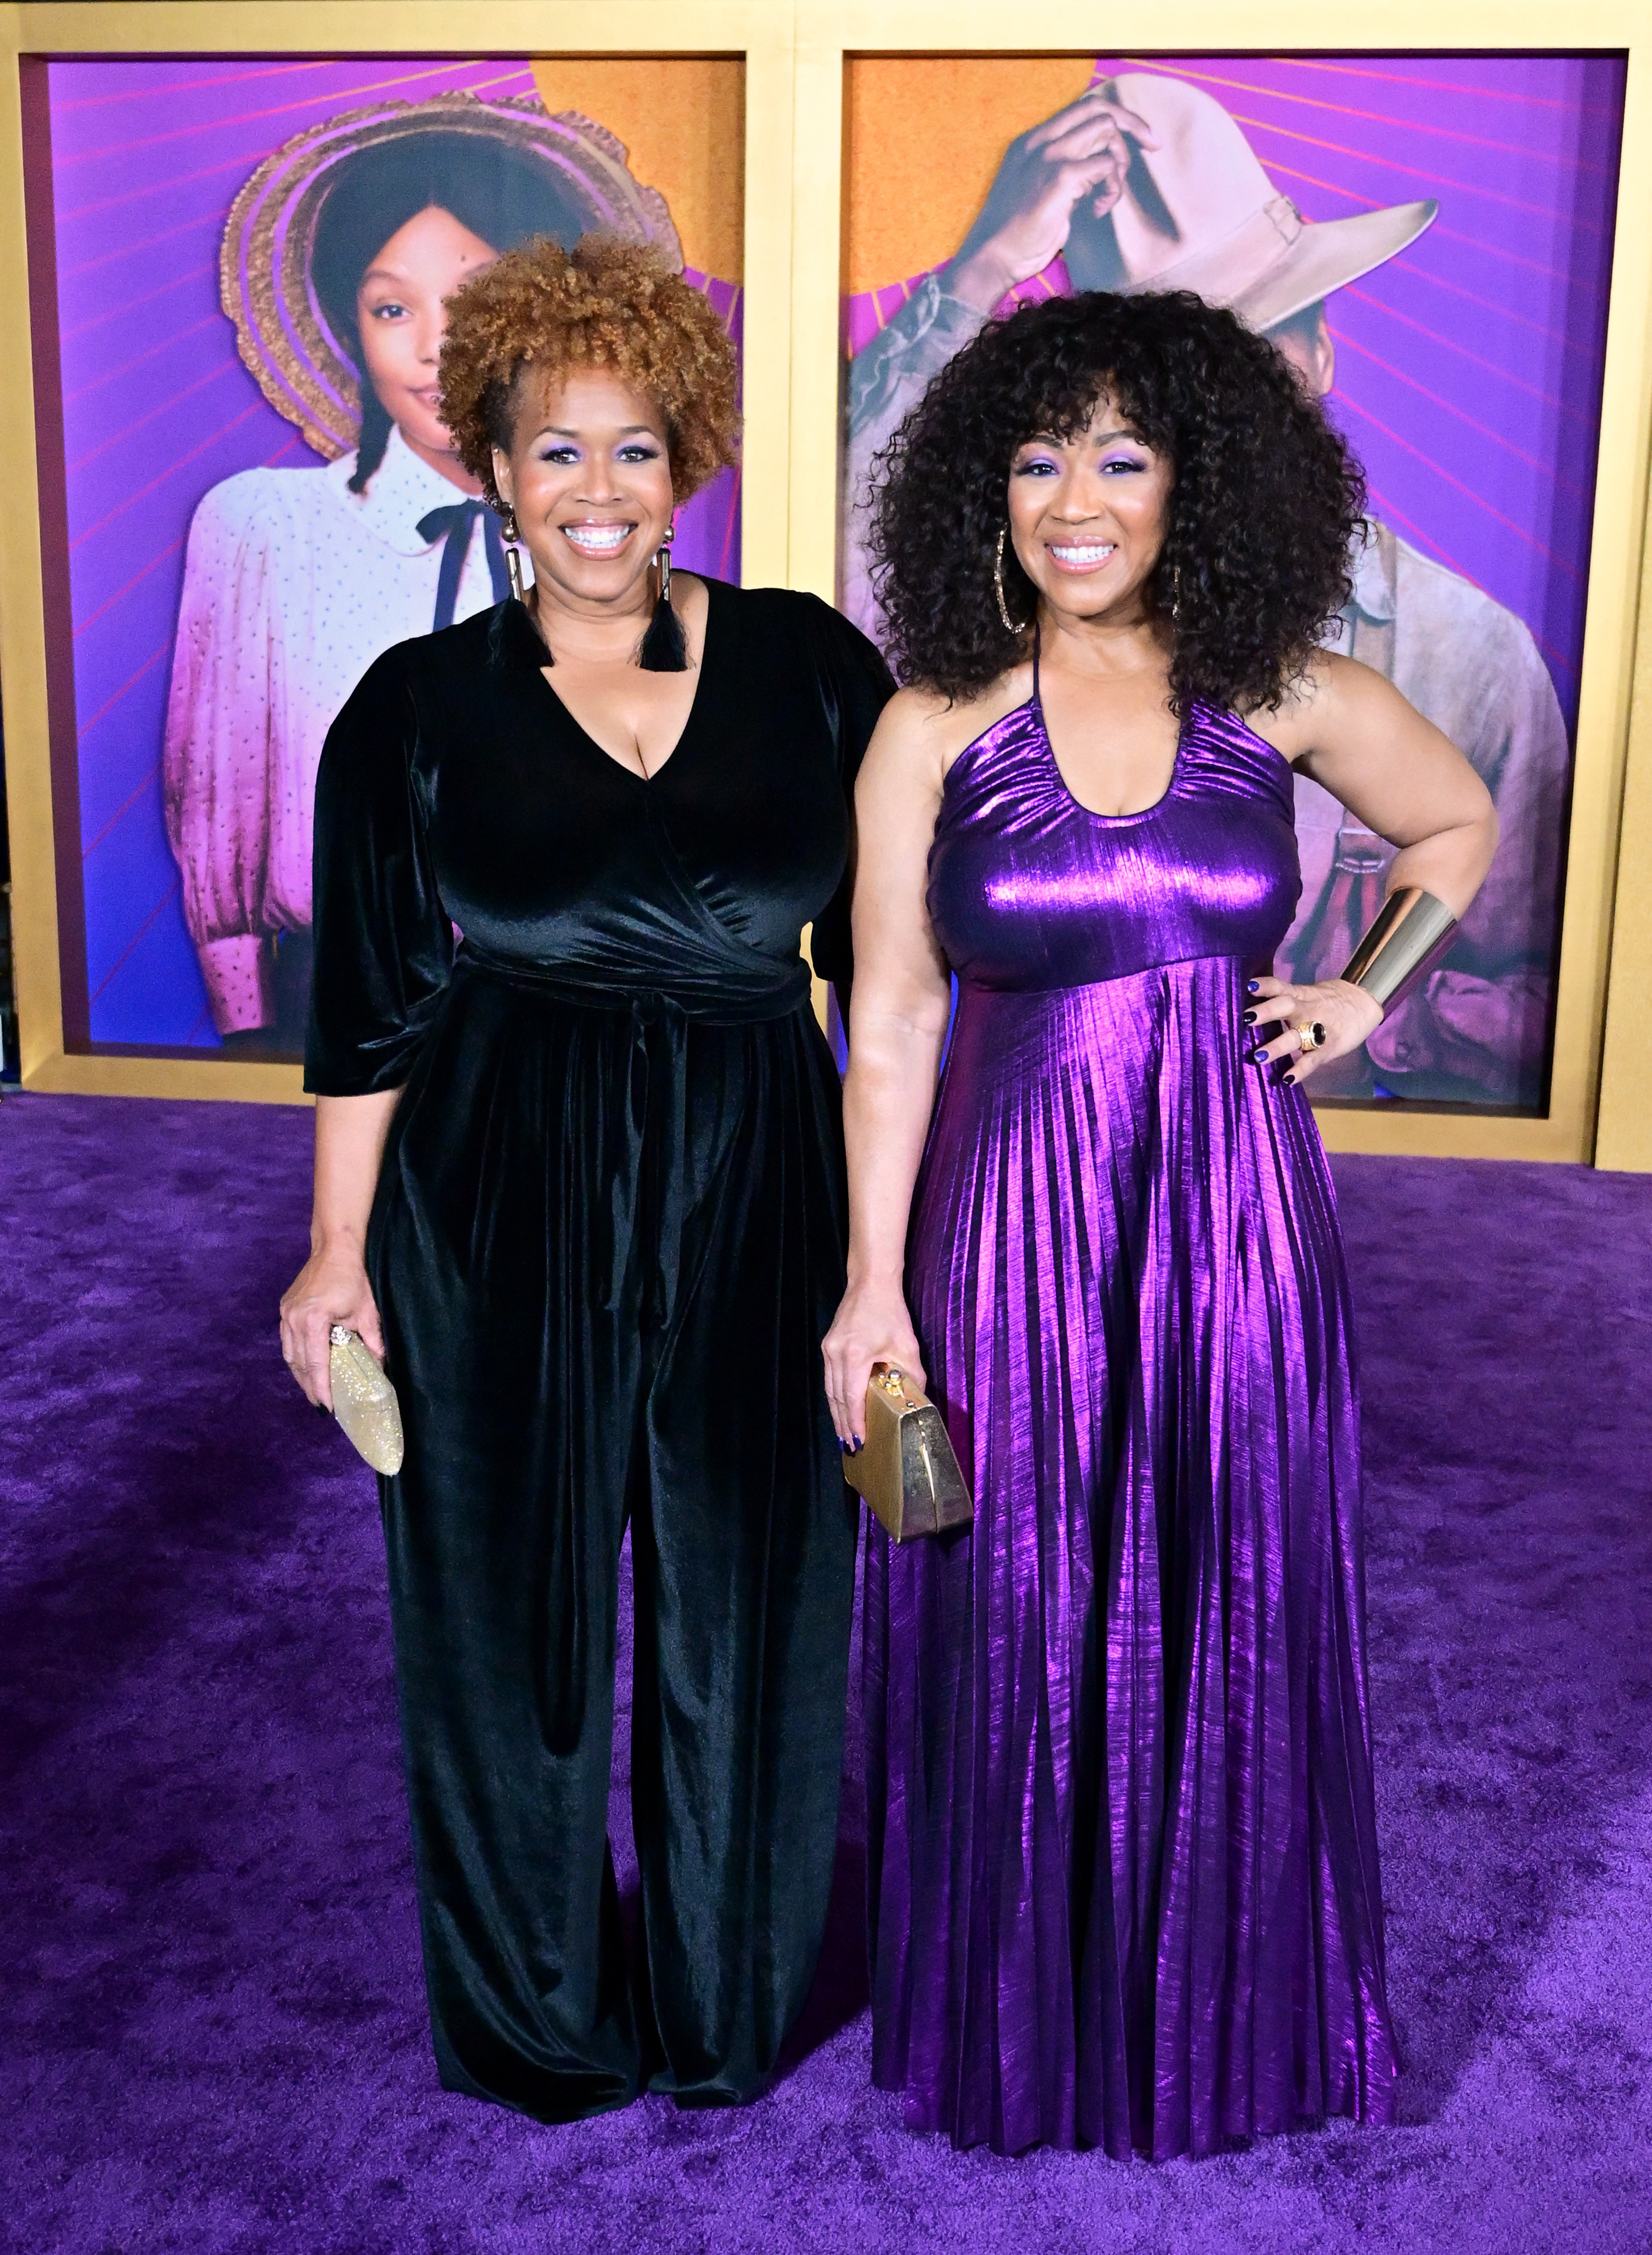 Erica Atkins-Campbell in a bluish short-sleeved pantsuit and Trecina Atkins-Campbell in a purple sleeveless gown